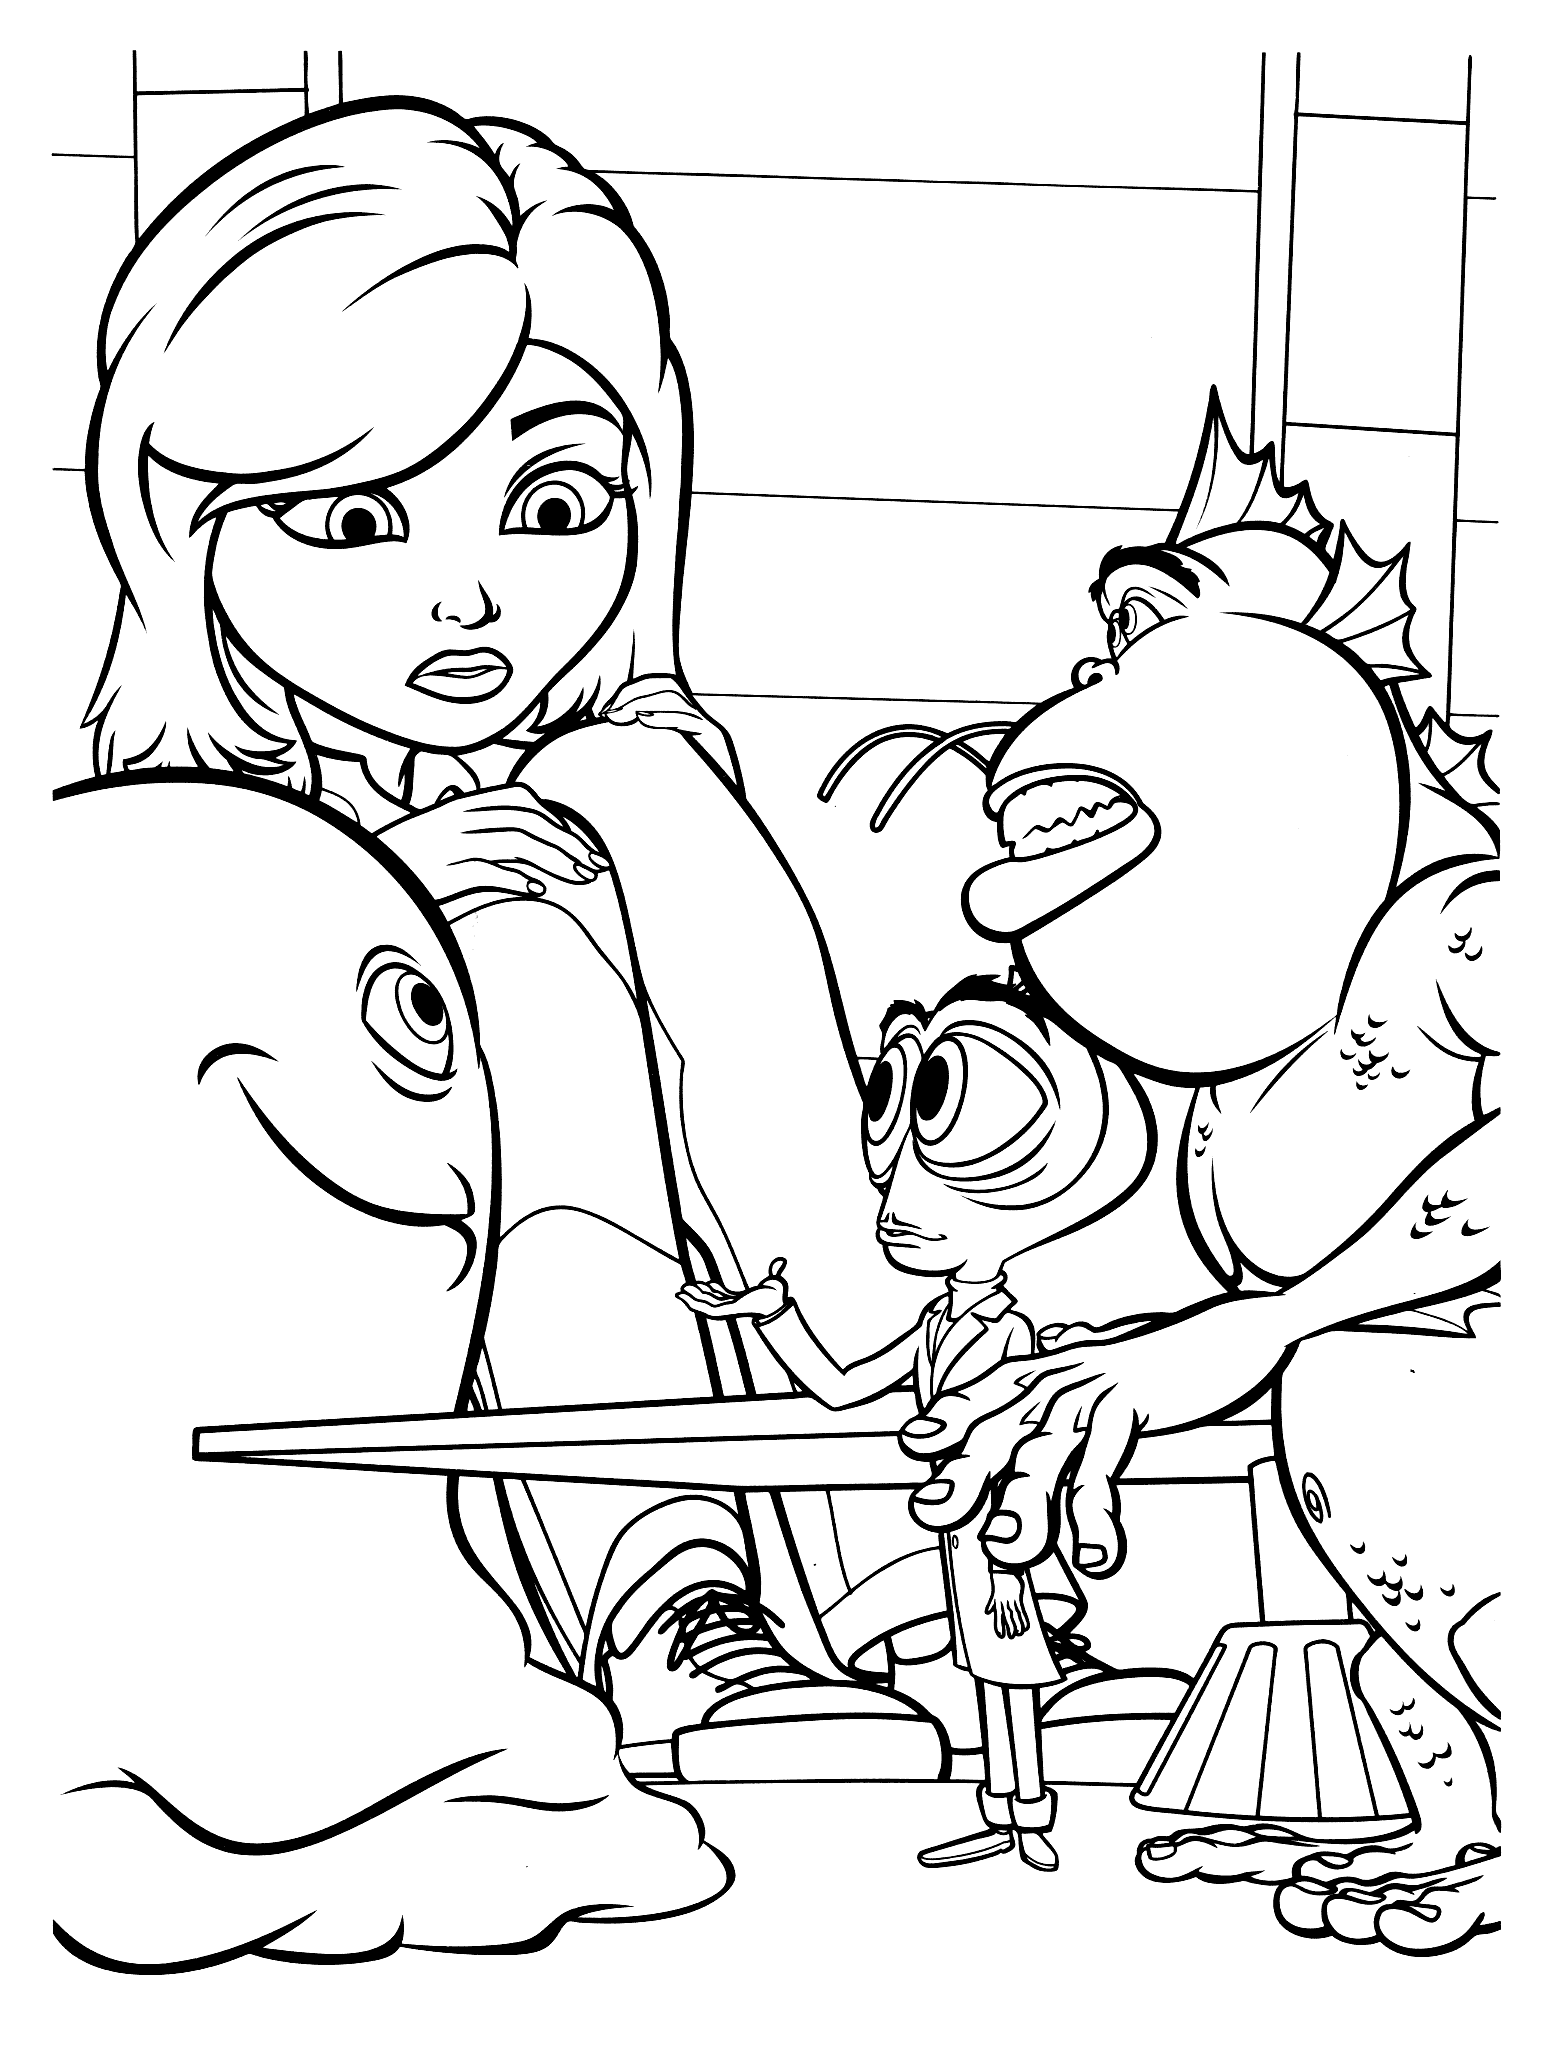 Coloring page - Monster defenders